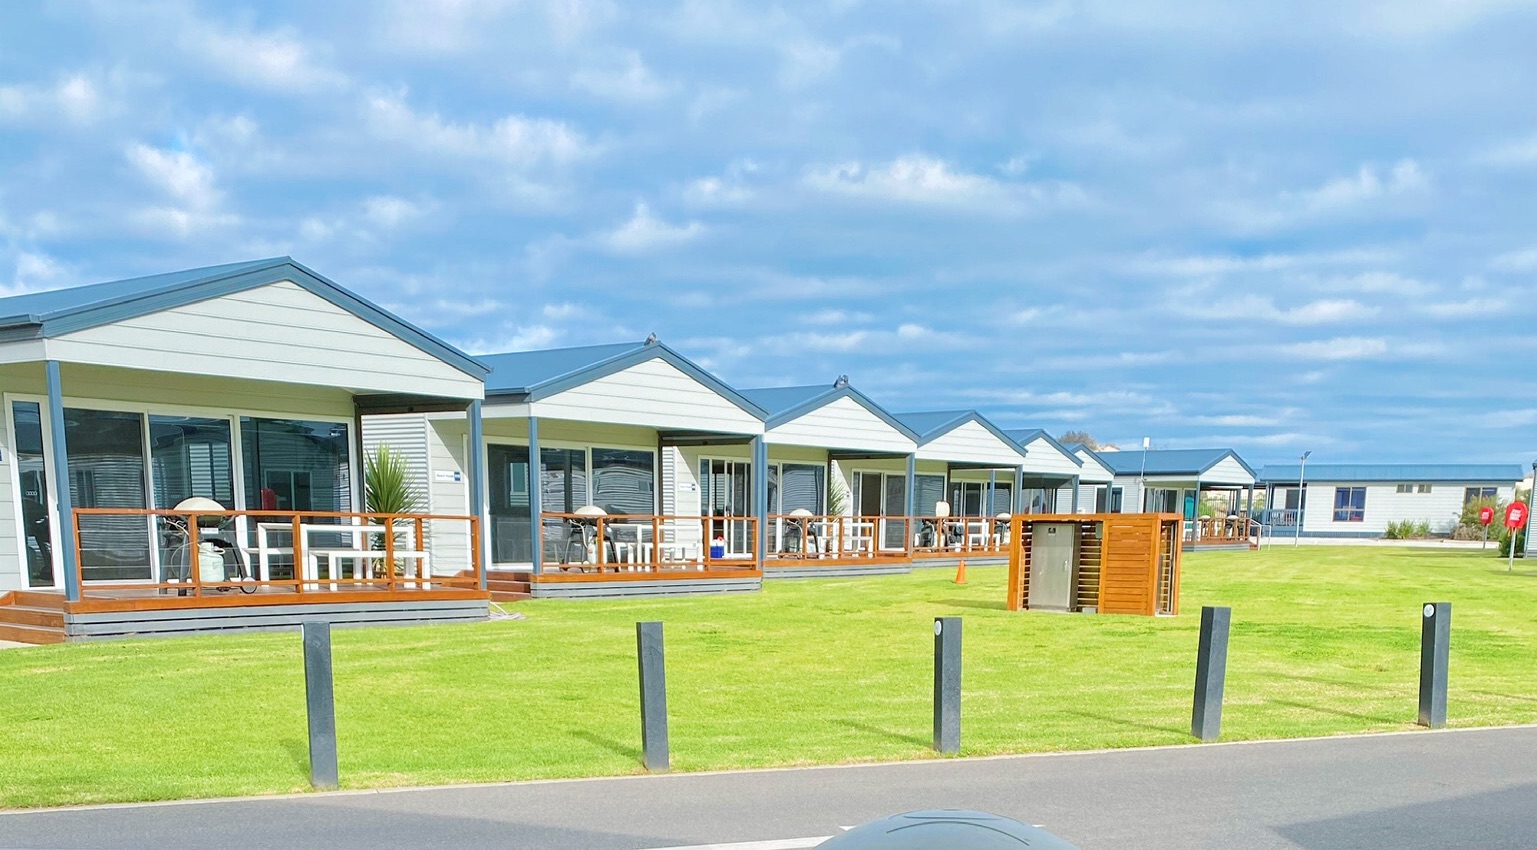 WIN 2 nights of accommodation in a 2 bedroom Beach House at the BIG4 West Beach Parks